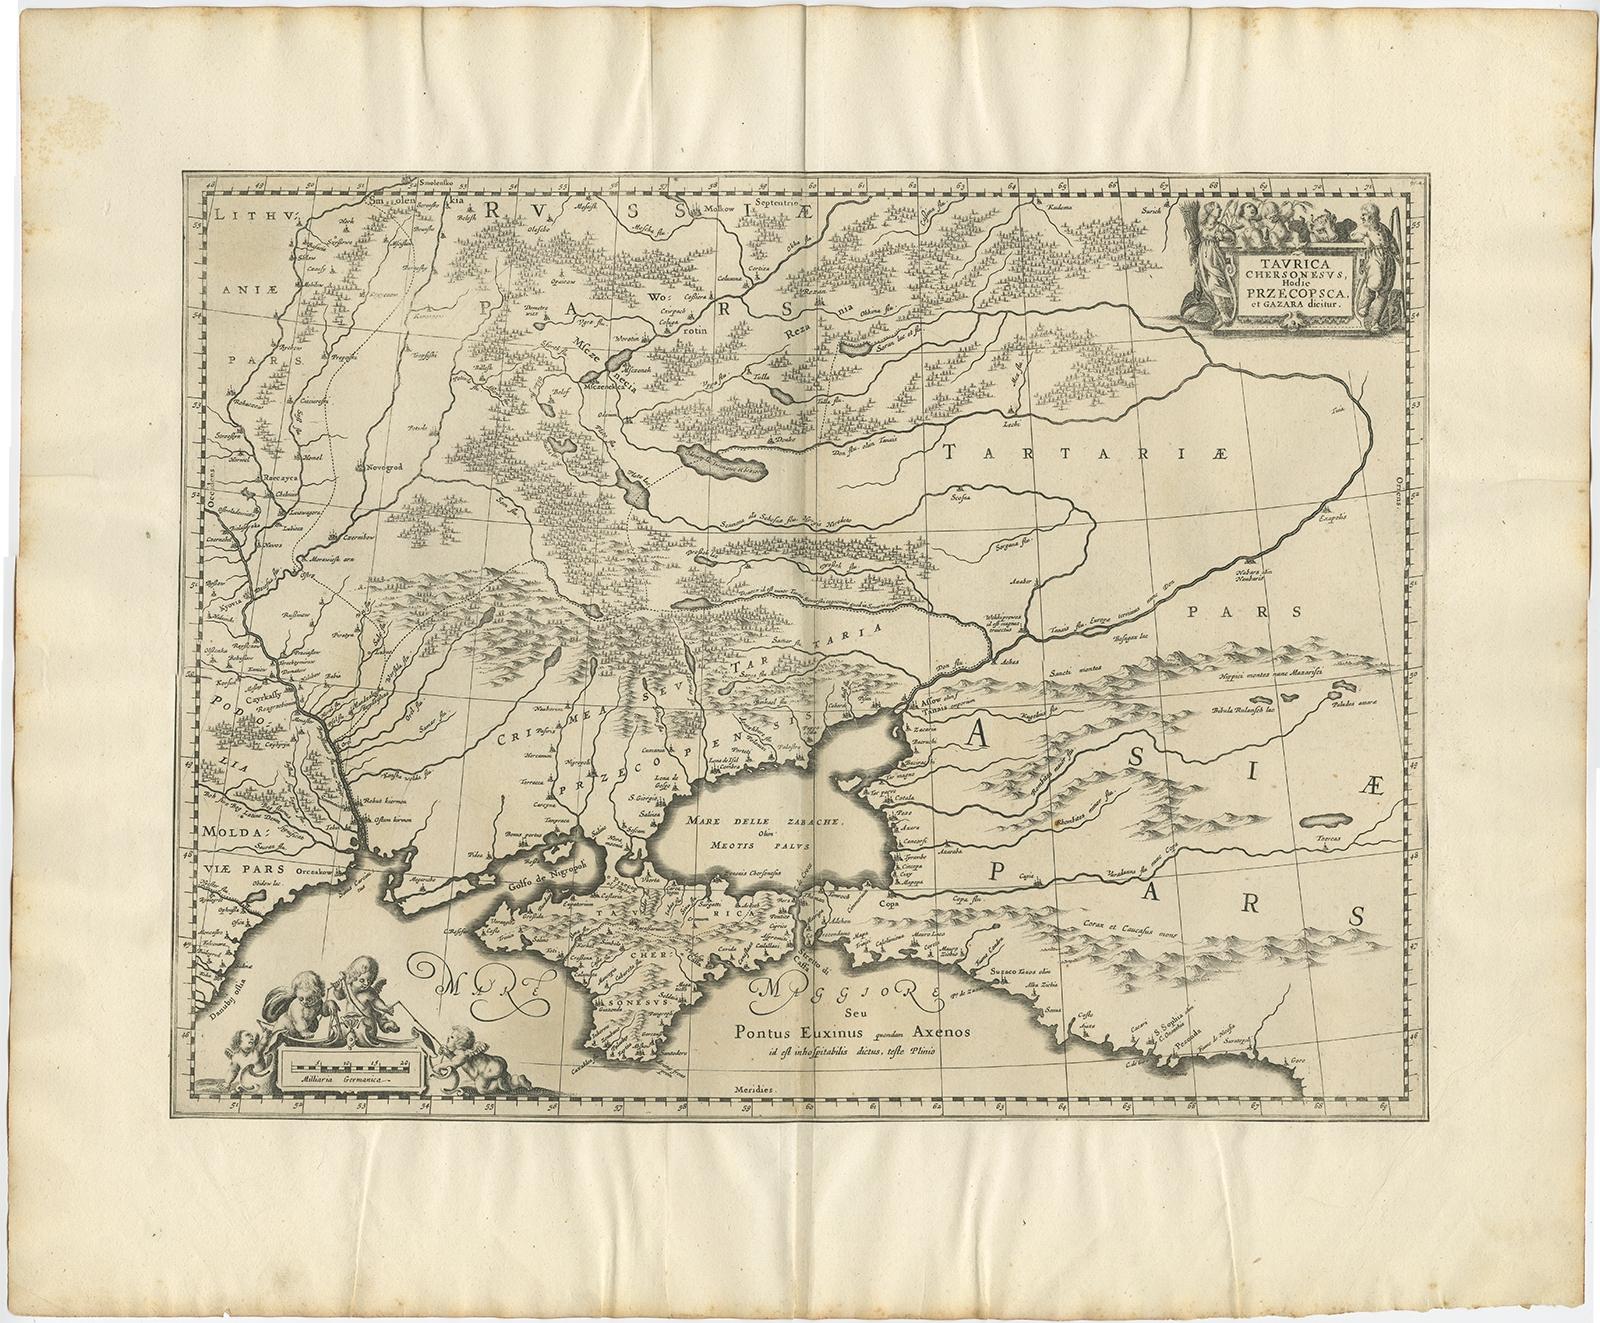 Antique map titled 'Taurica Chersonesus hodie Przecopsca et Gazara dicitur'. 

Map showing the area between the northern coast of the Black Sea including the mouth of the Danube River and Moscow (Russia). Made after the map by Blaeu. 

Artists